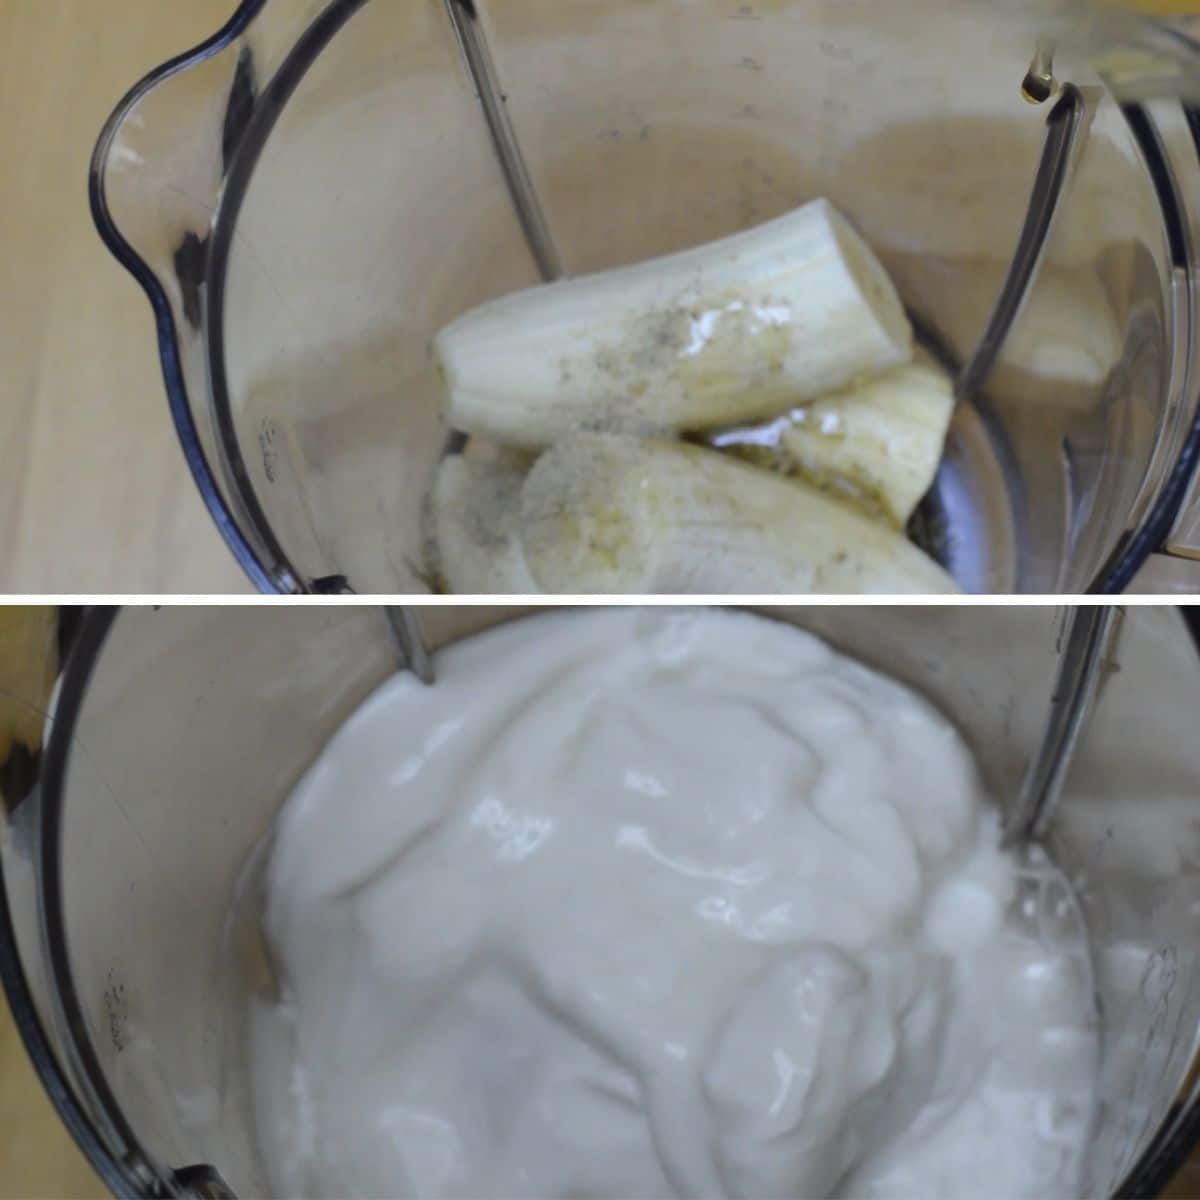 college of 2 images with top image of banana and other ingredients in the blender jar and the bottom image with the coconut milk in the blender.